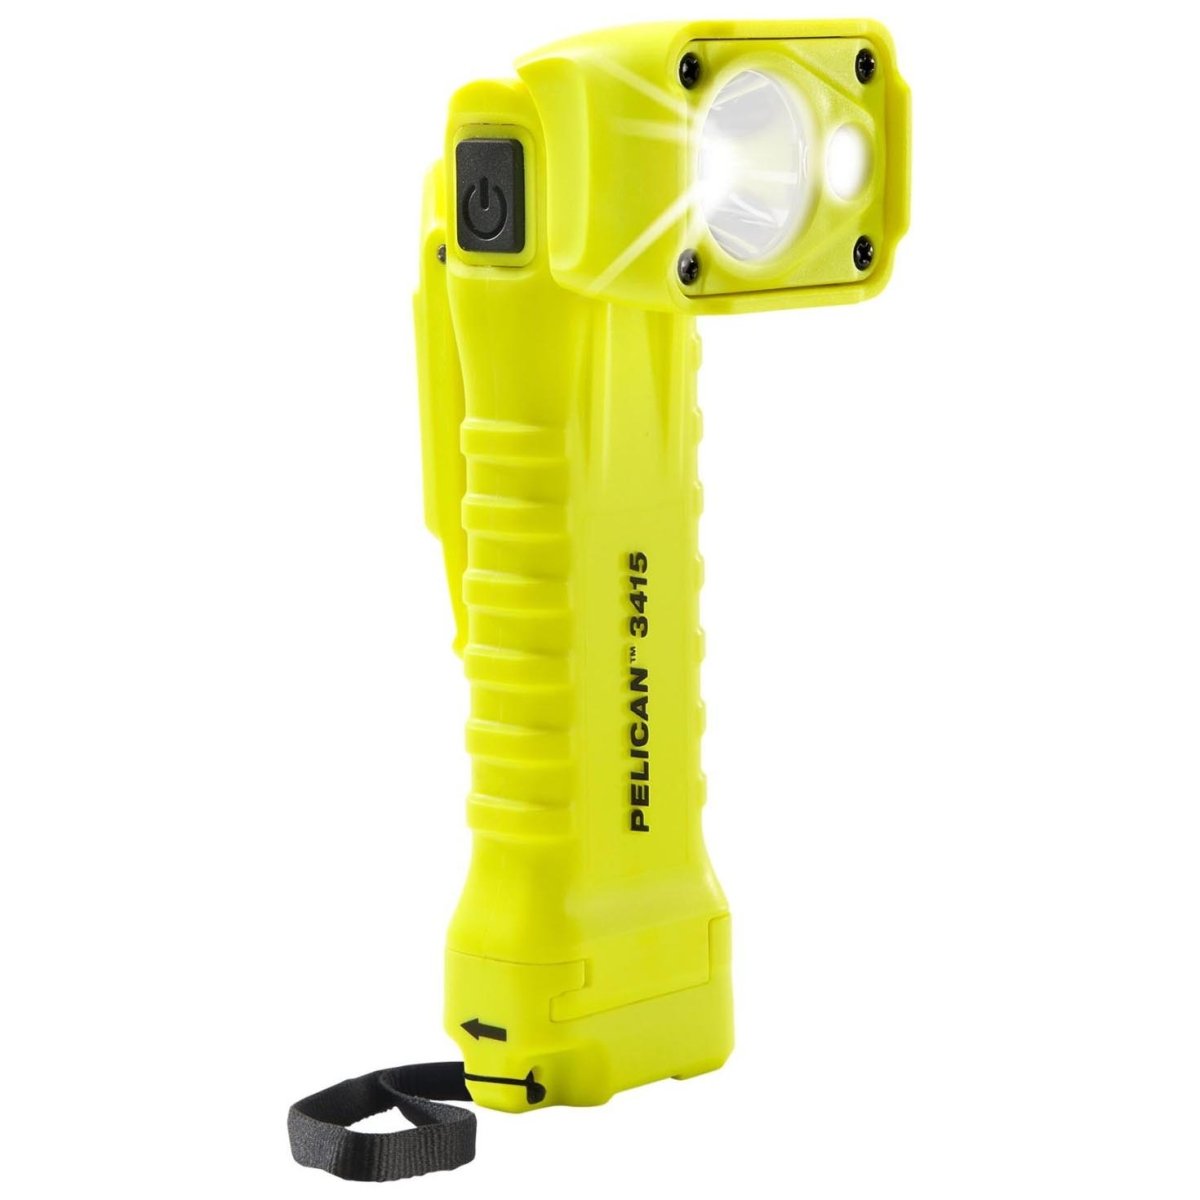 3415 Pelican Right-Angled Safety Torch | Pelican | A247 Gear